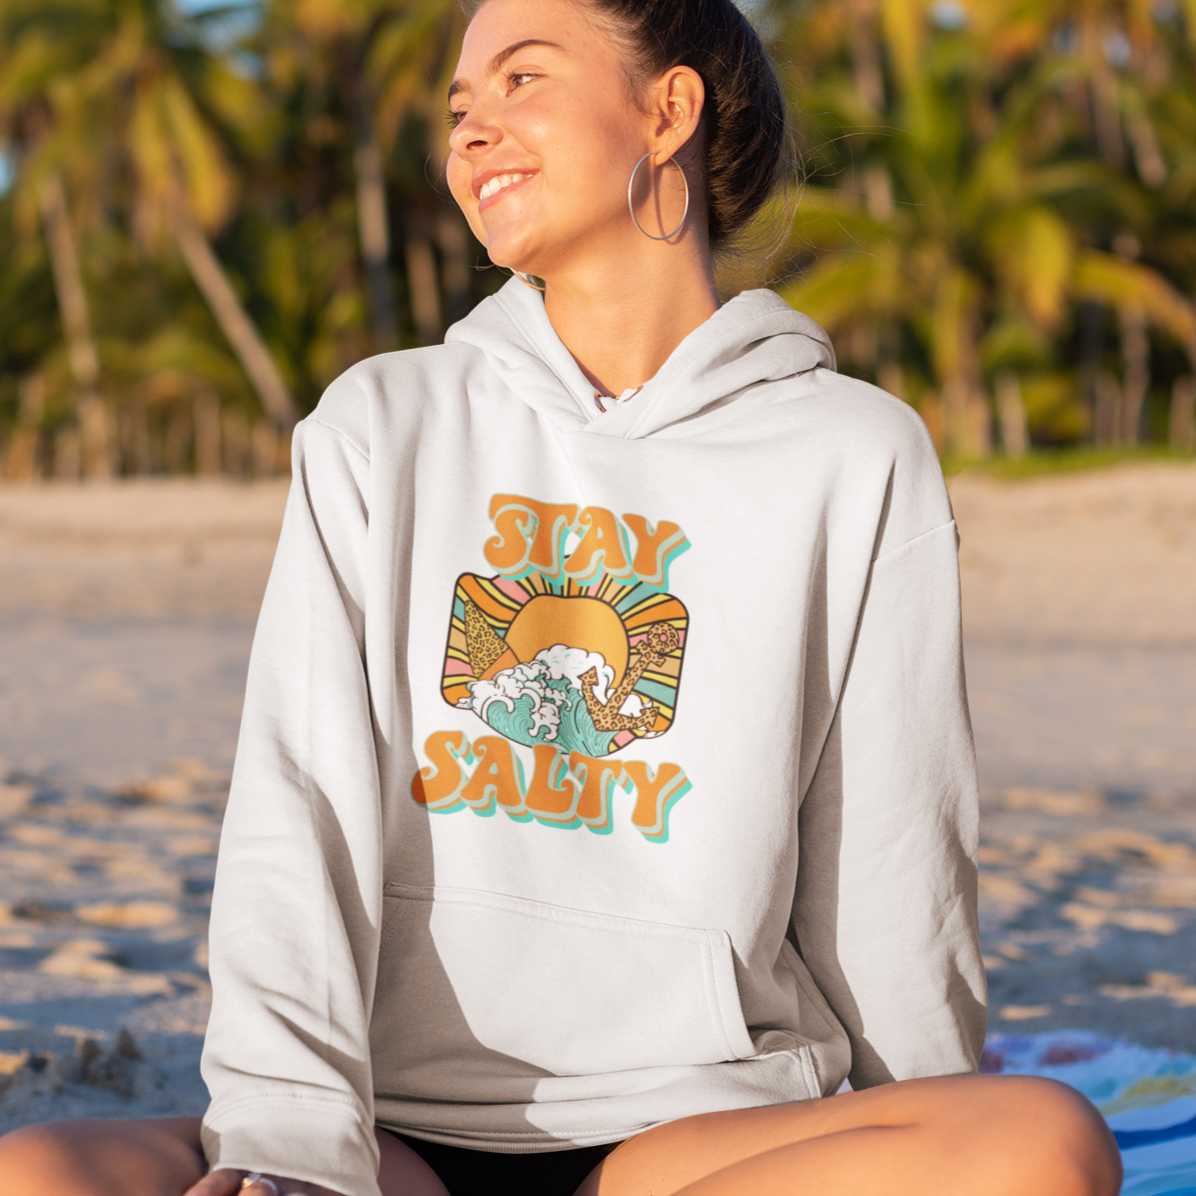 Stay Salty - Full Color Heat Transfer